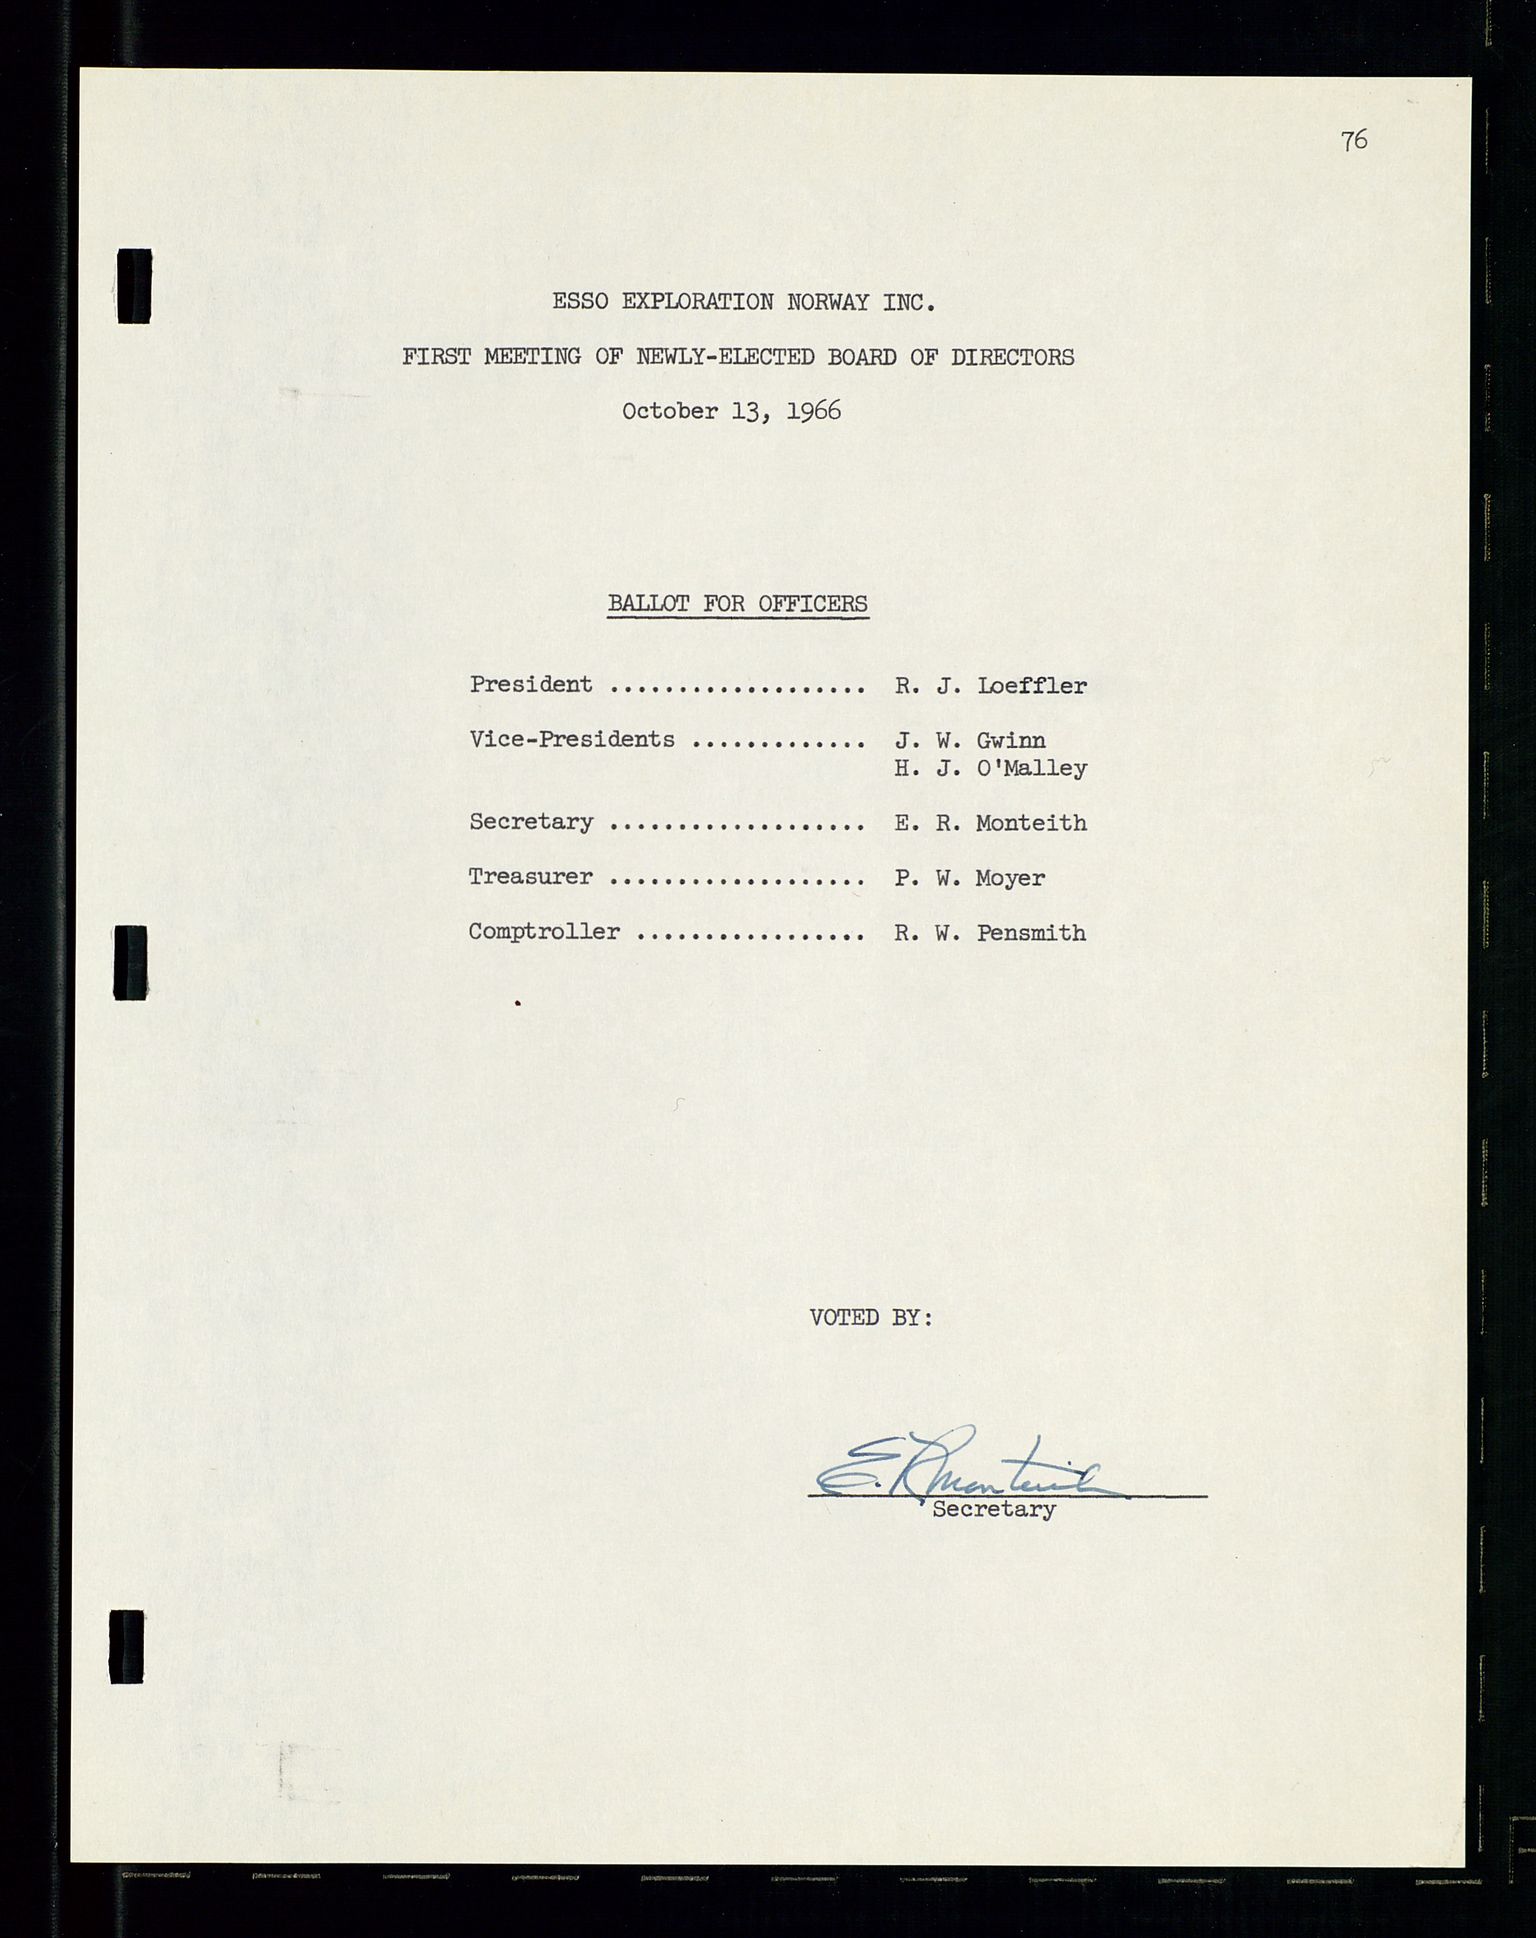 Pa 1512 - Esso Exploration and Production Norway Inc., SAST/A-101917/A/Aa/L0001/0001: Styredokumenter / Corporate records, By-Laws, Board meeting minutes, Incorporations, 1965-1975, s. 76